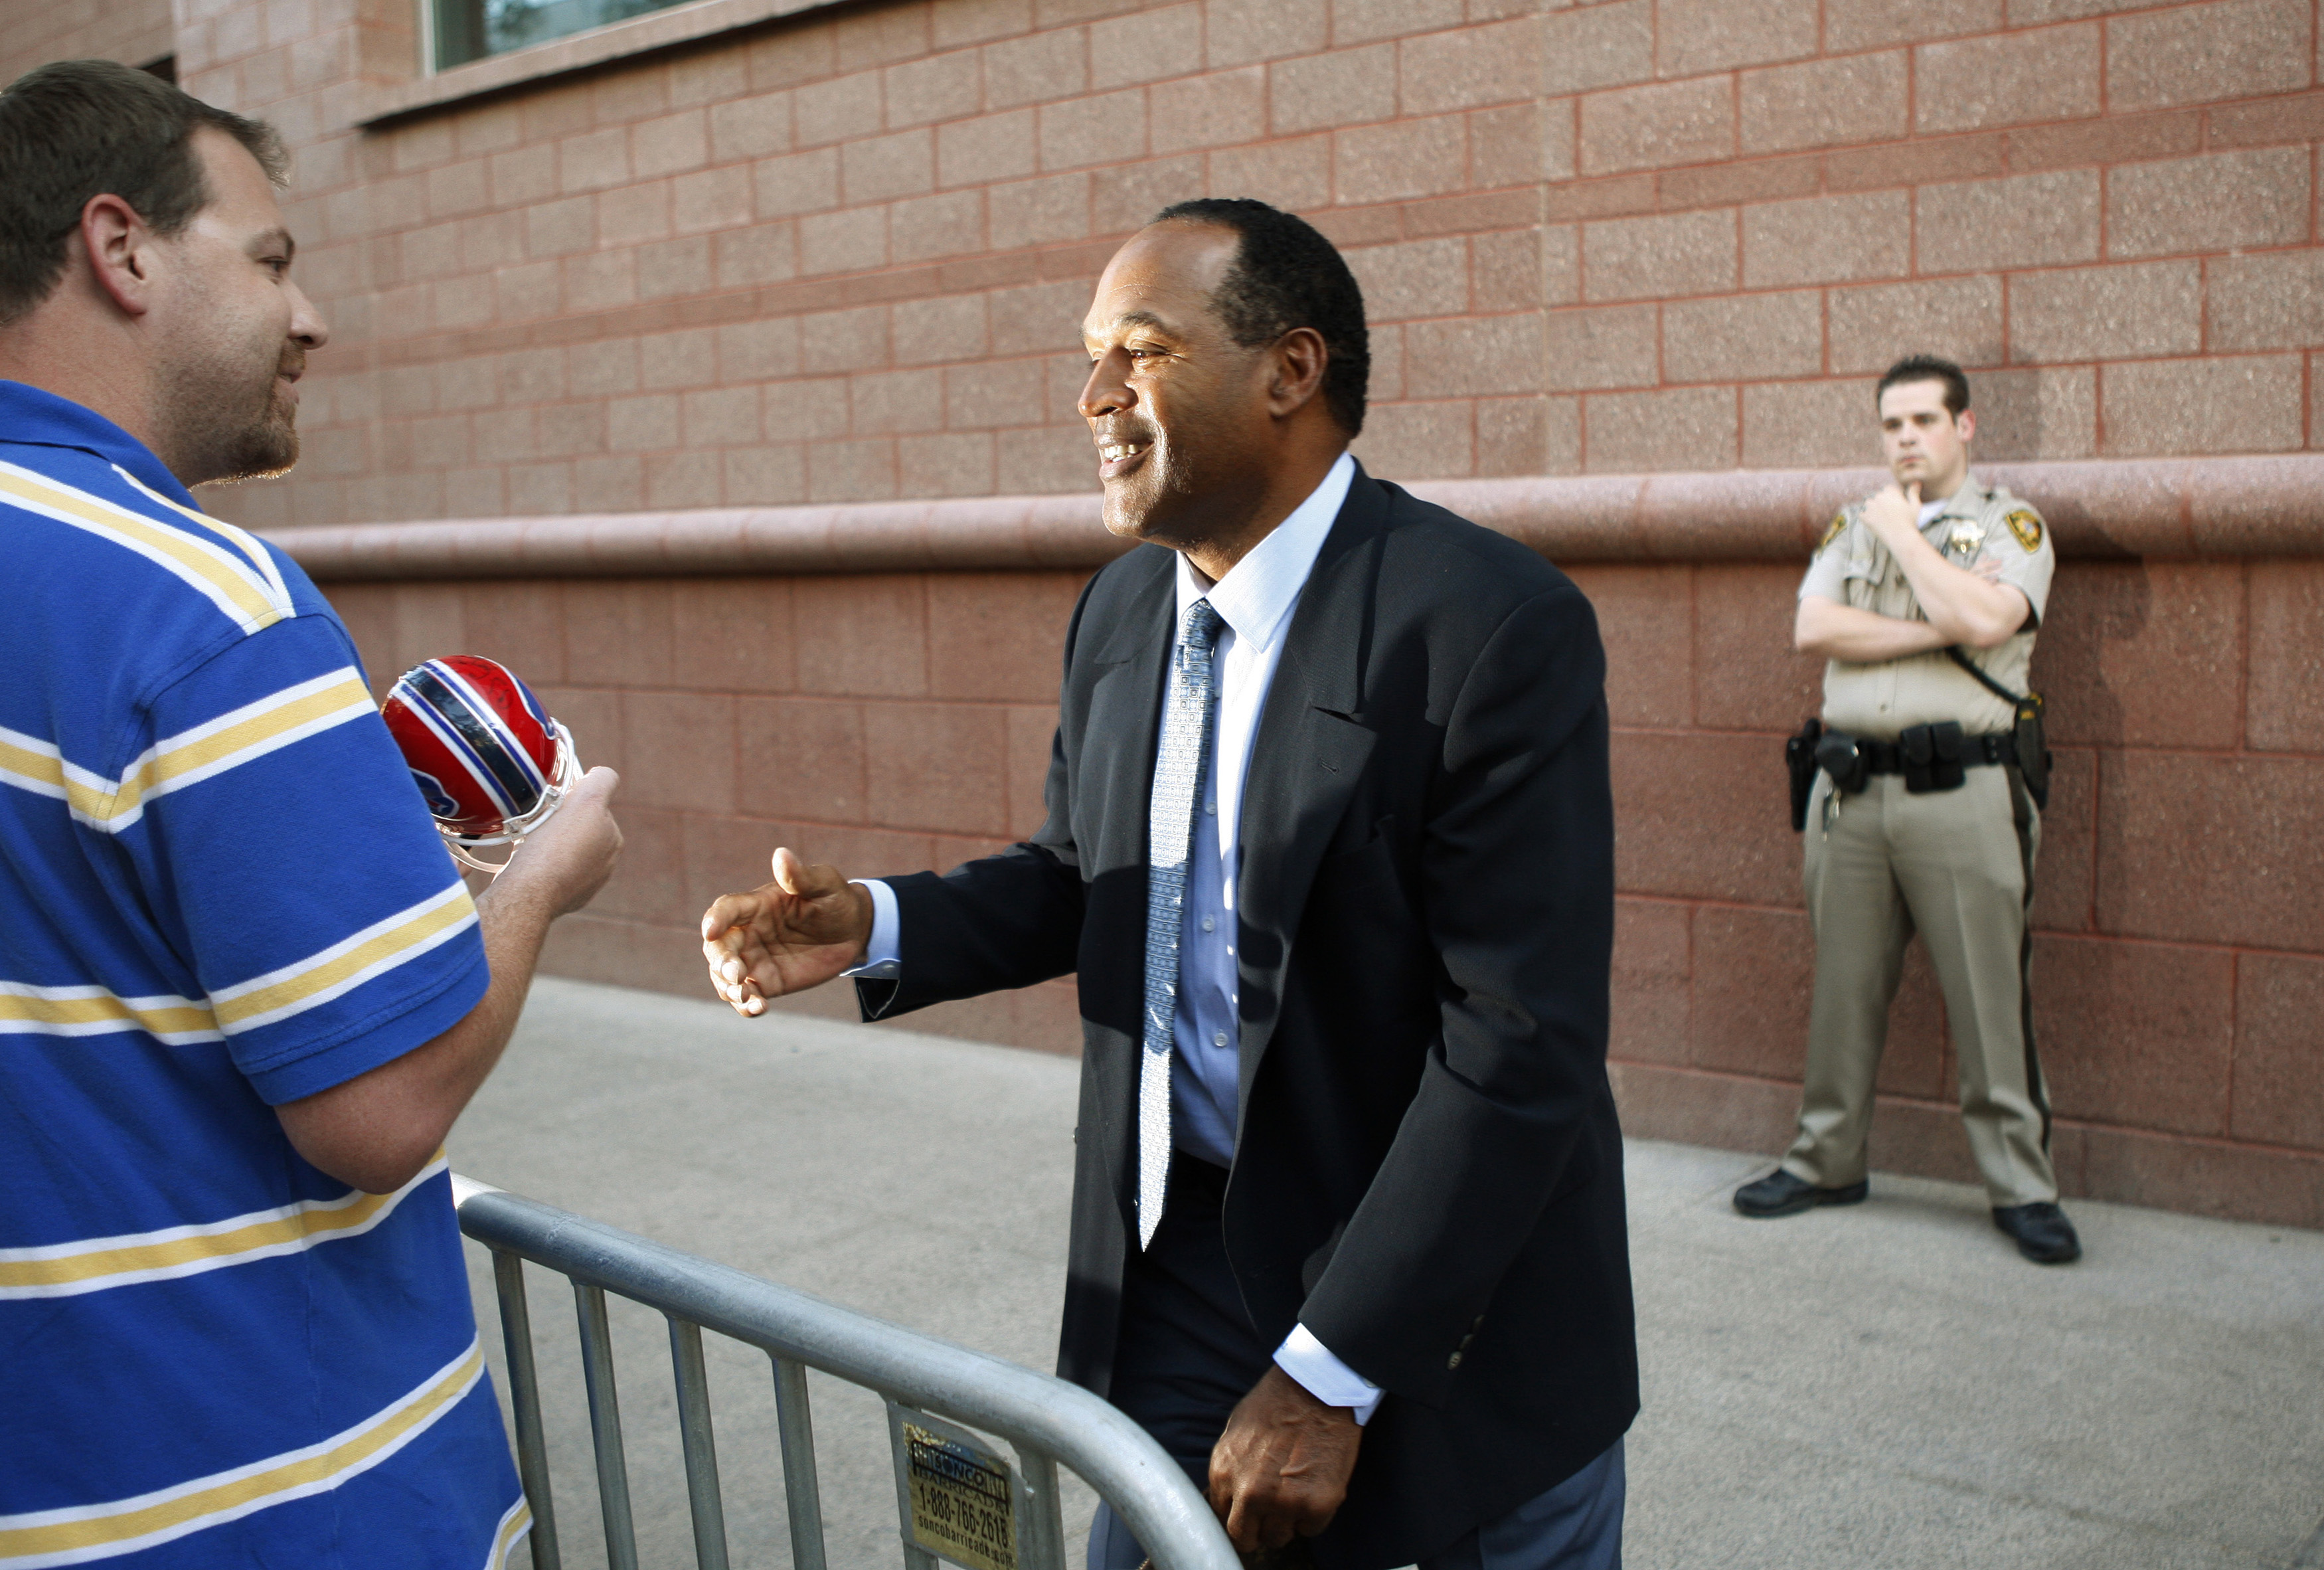 O.J. Simpson signs an autograph as he leaves the Clark County Regional Justice Center in Las Vegas